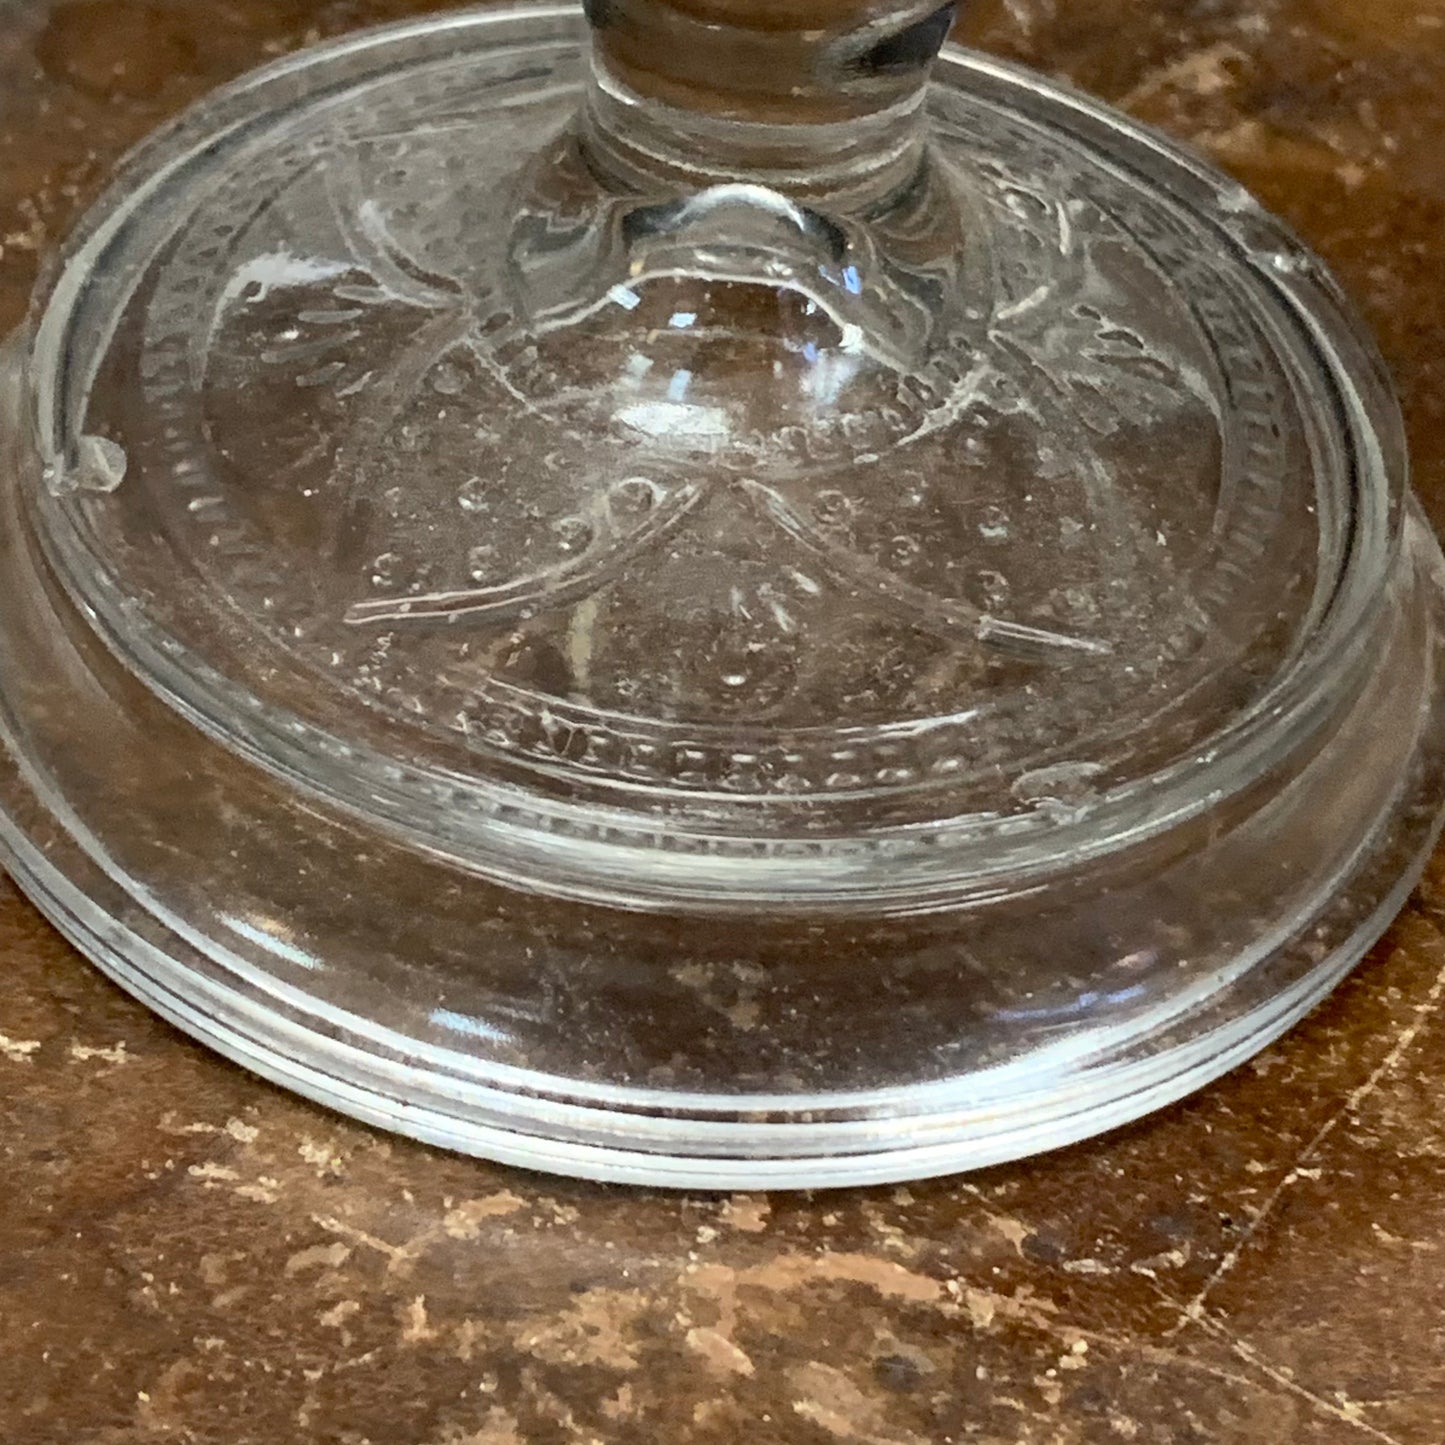 Elgort Early American Cake stand